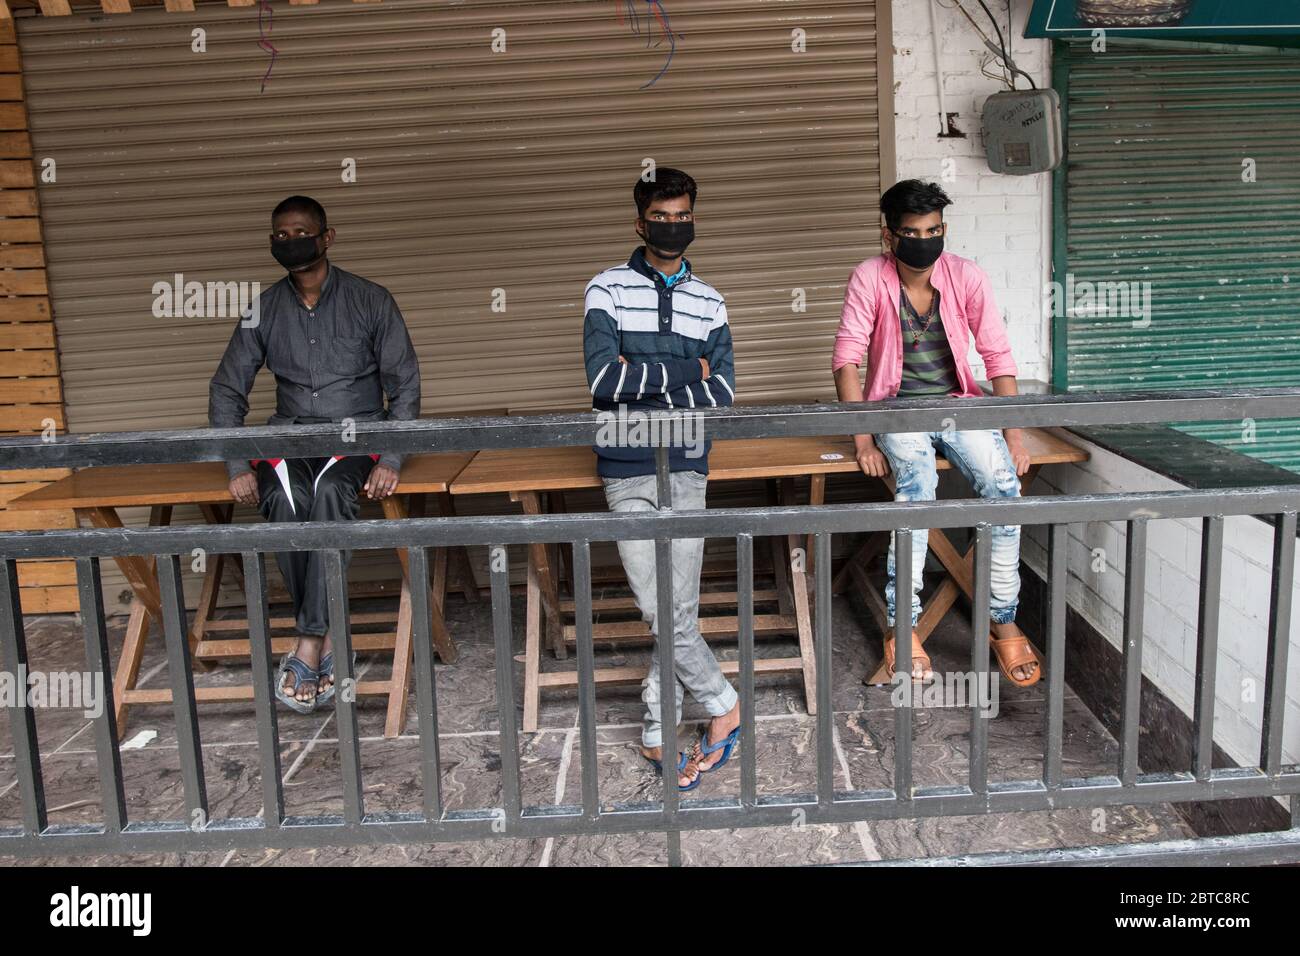 People wearing protective mask and social distancing to prevent the spread of coronavirus COVID 19. Dharamshala, India. Stock Photo